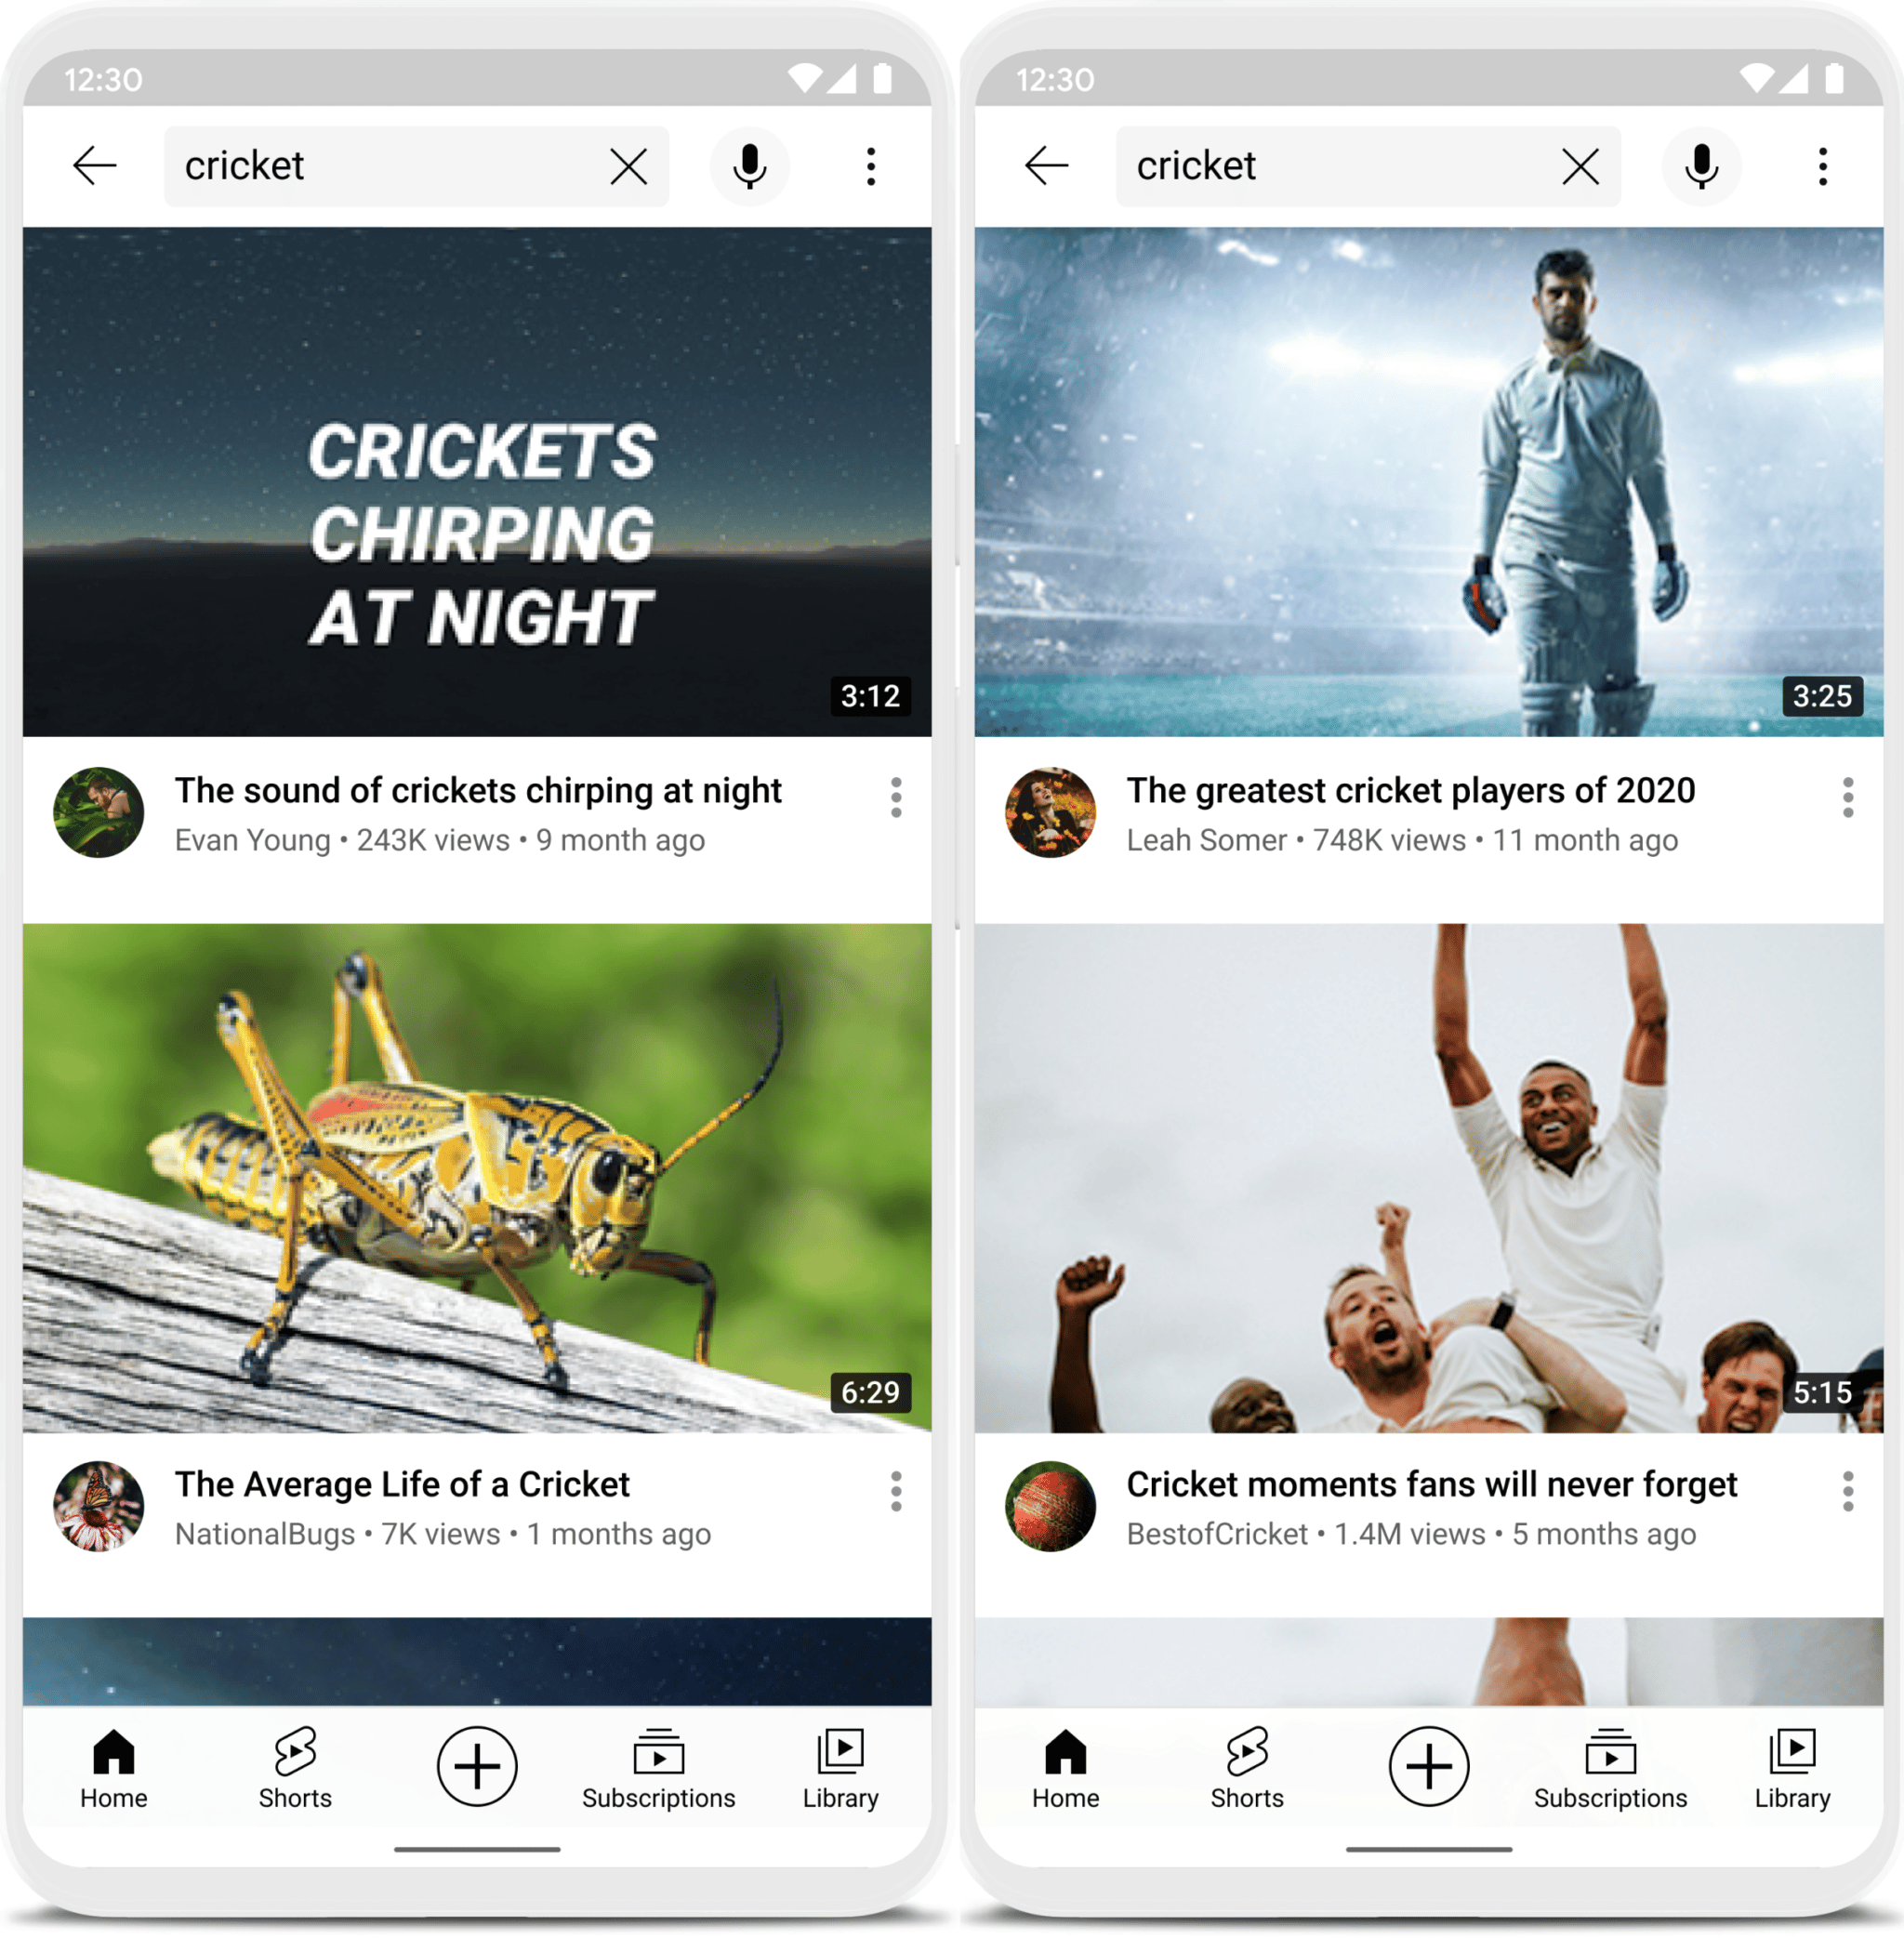 A search for the term "cricket" presents differently on two mobile devices. The device on the left shares videos about crickets in nature and the device on the right shows videos about cricket, the sport.